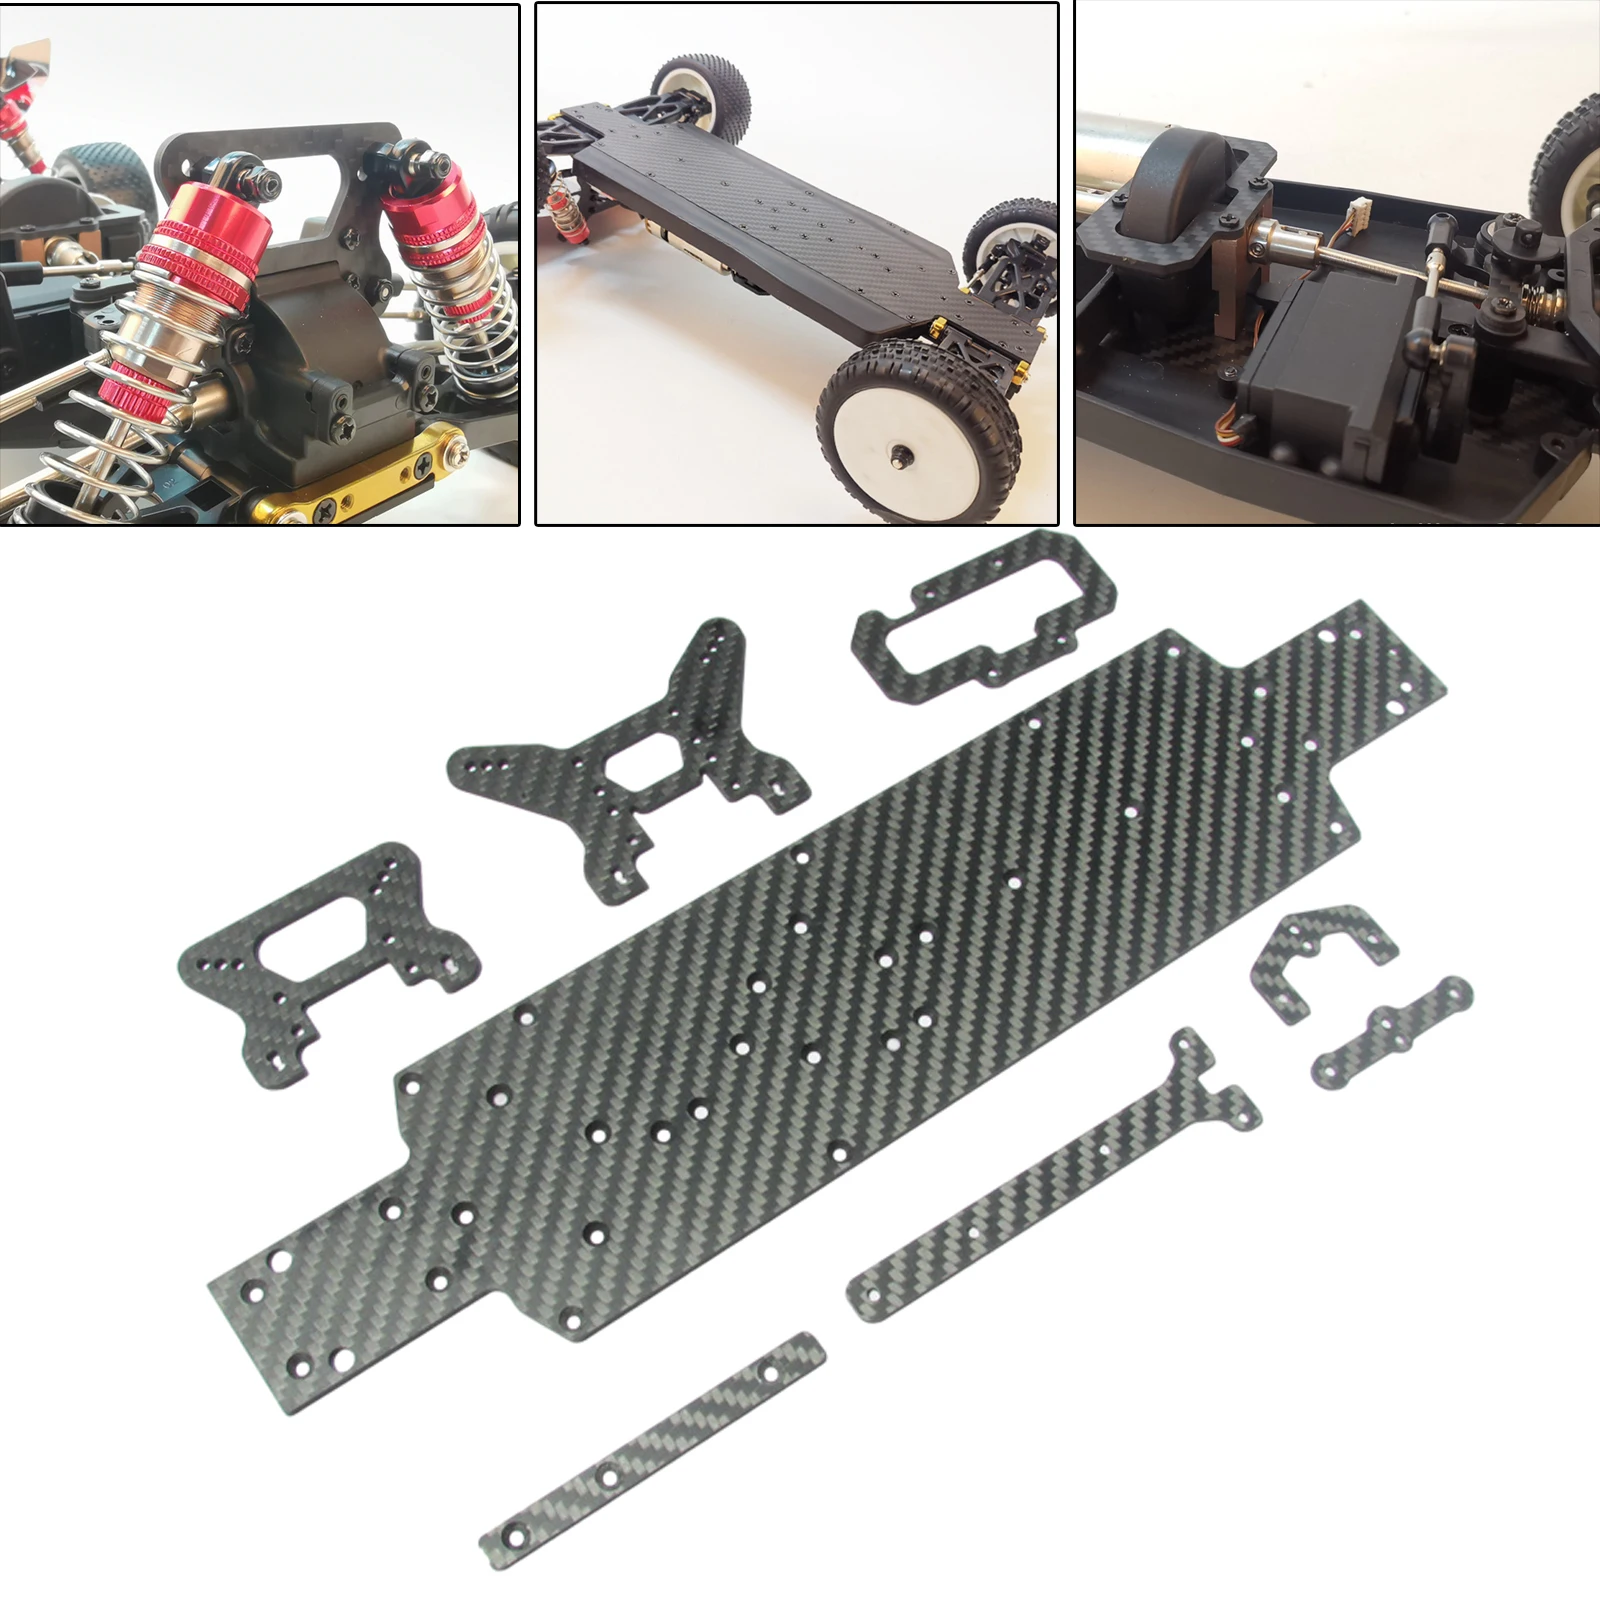 1:10 Remote Control Carbon Fiber Front & Rear Shock Tower,Main Chassis for Wltoys 104001 Crawler